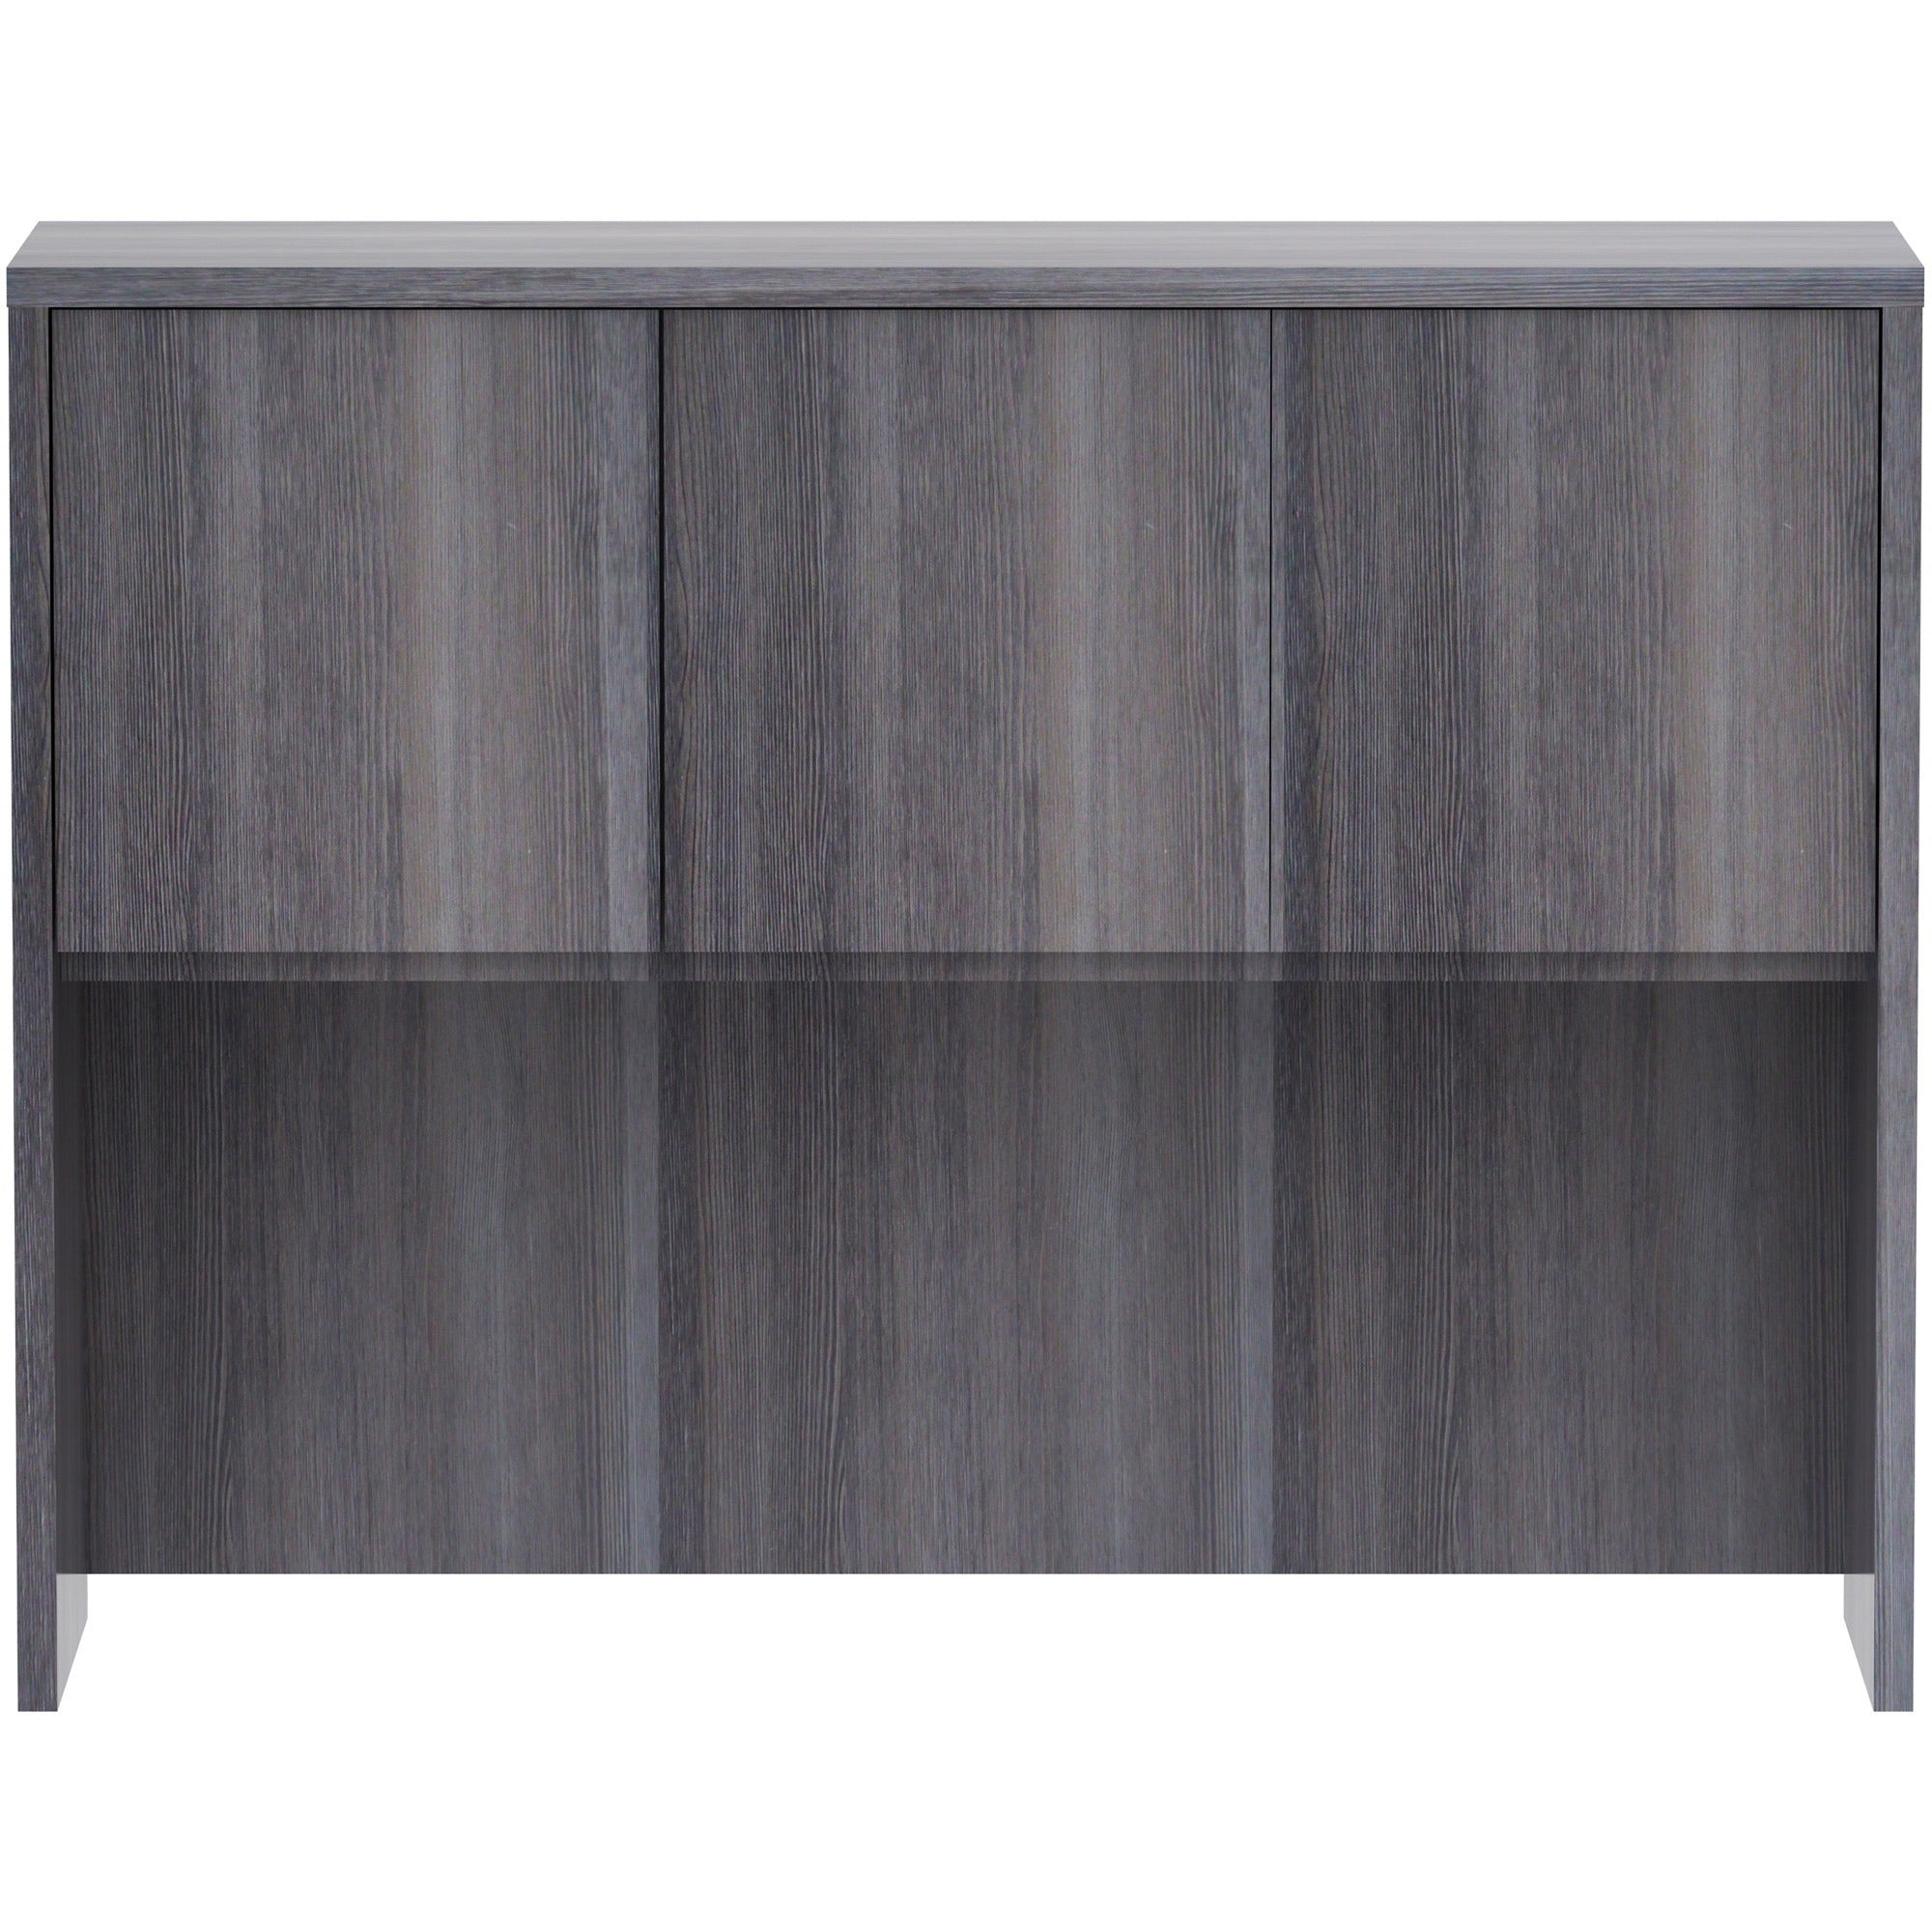 lorell-essentials-series-stack-on-hutch-with-doors-48-x-1536-3-doors-finish-weathered-charcoal-laminate_llr69621 - 2